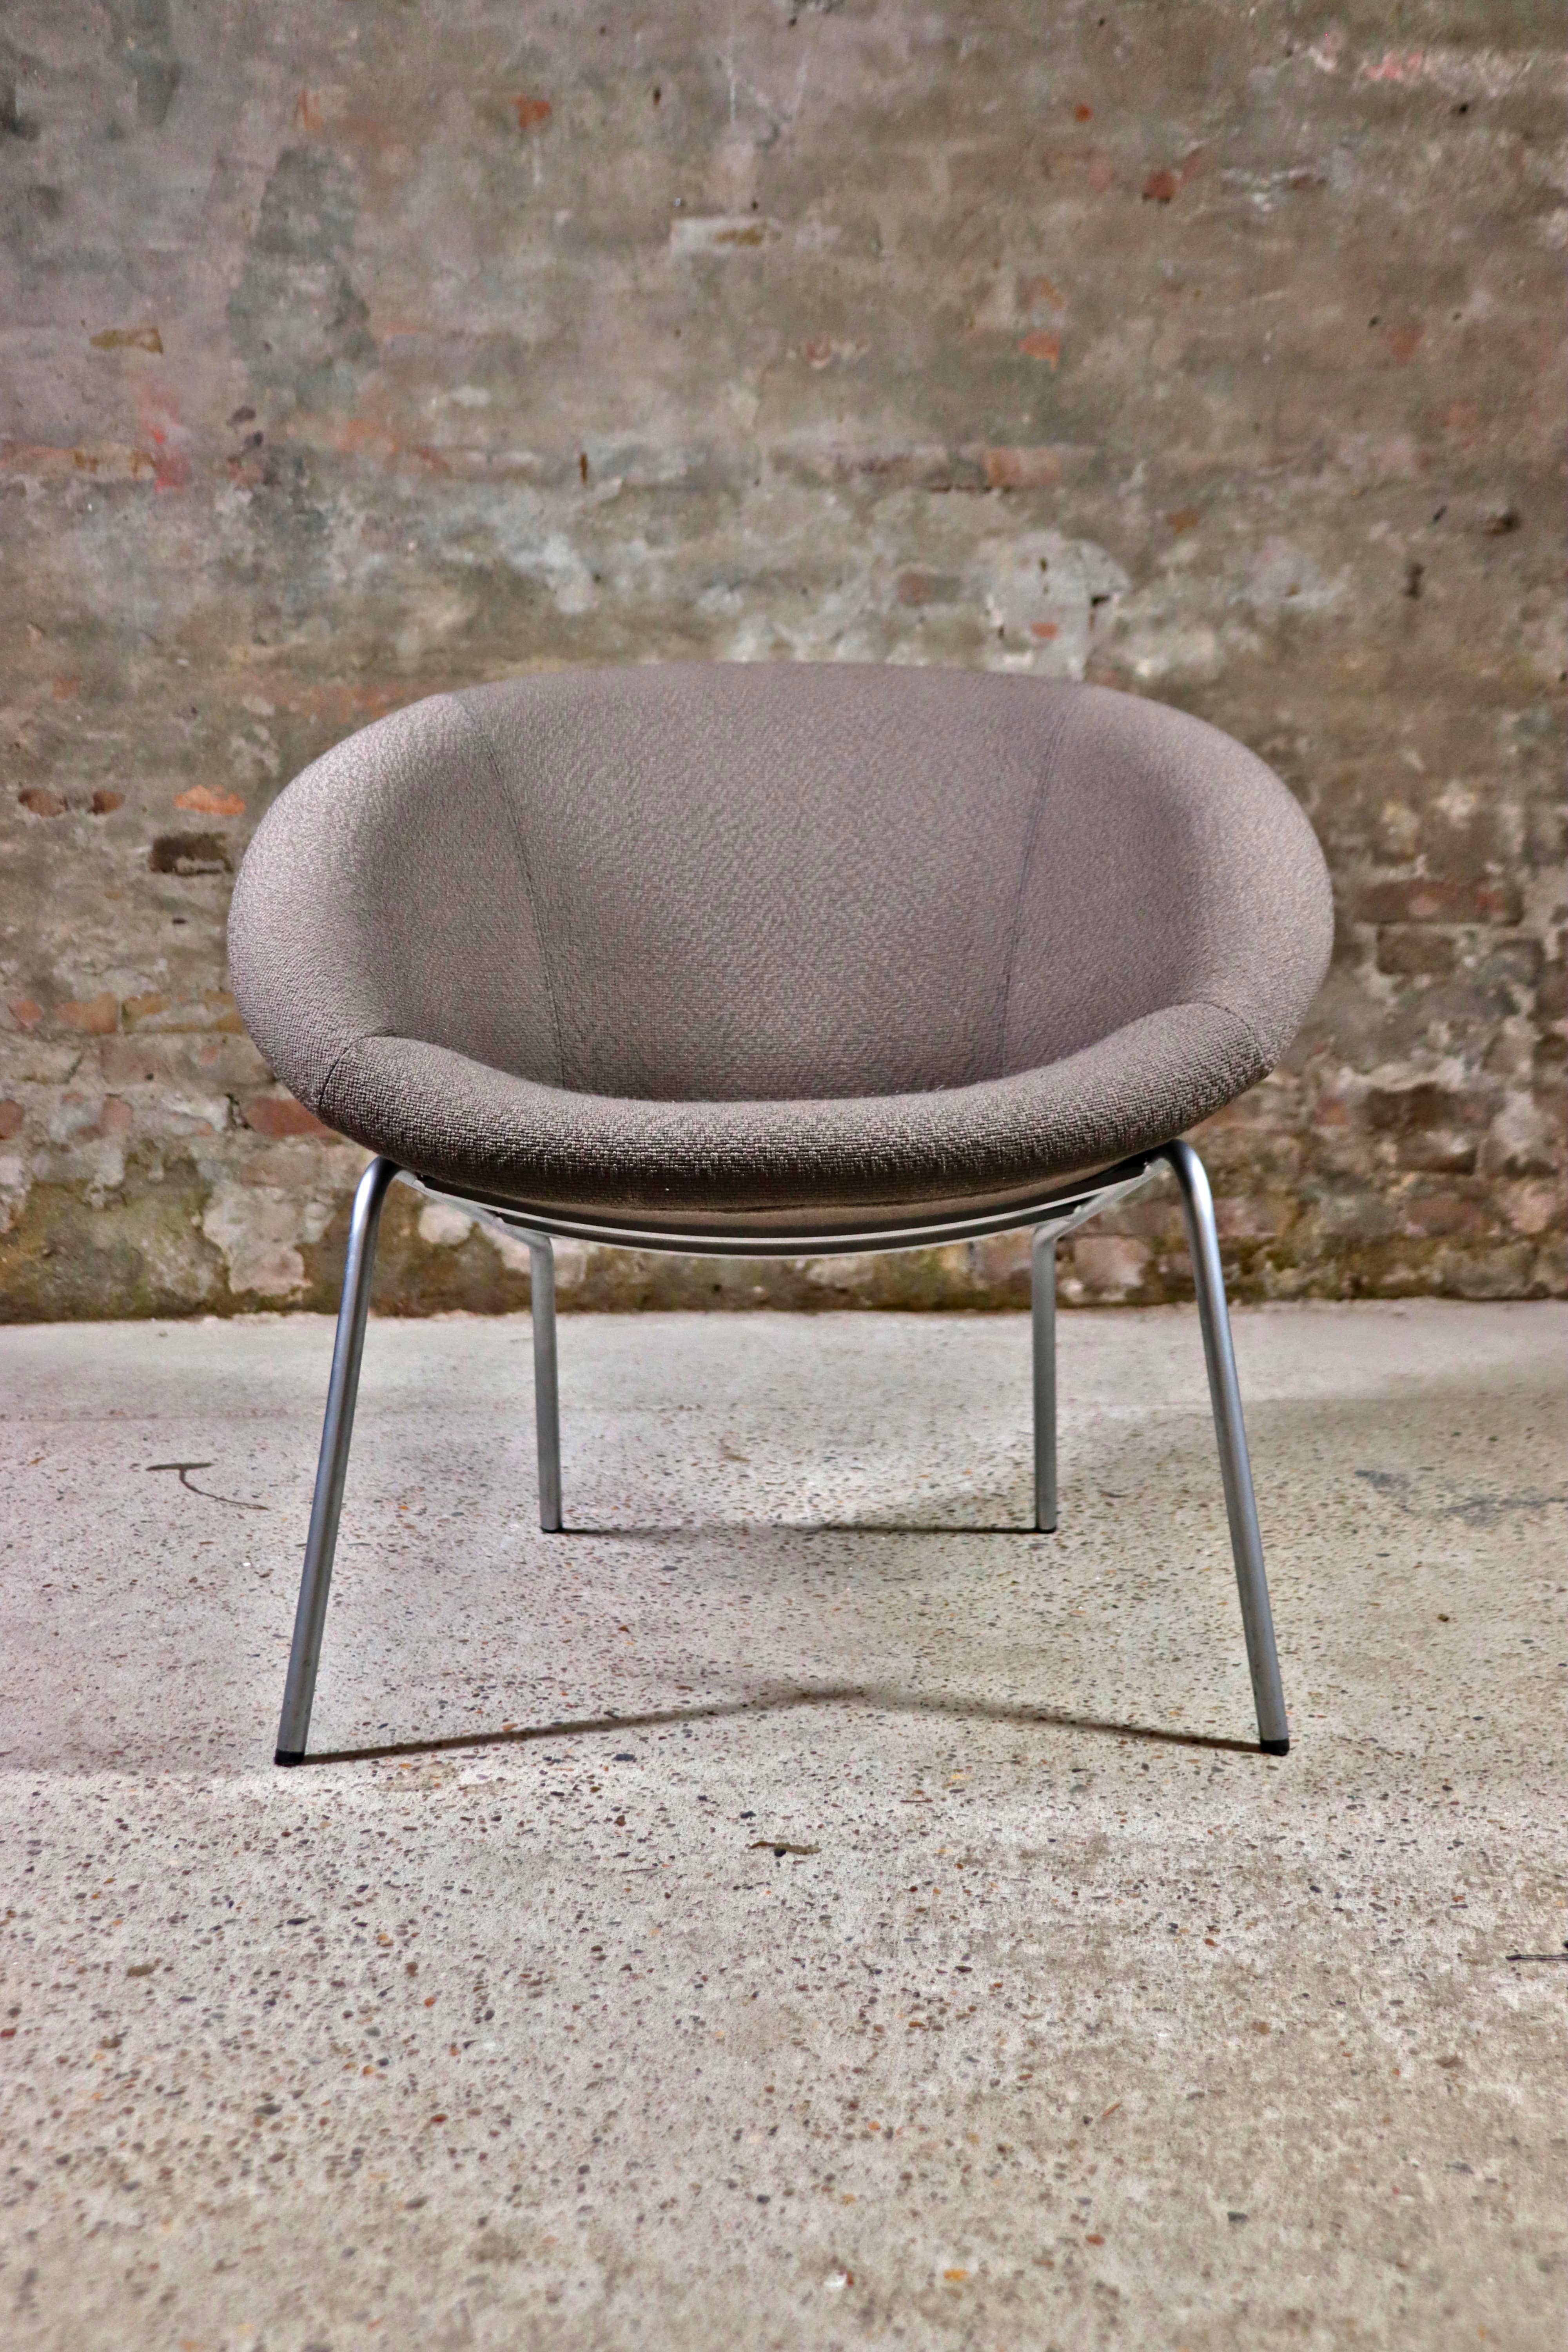 The Walter Knoll 369 Armchair was designed in 1956 by the Walter Knoll Team. At the time, the vast majority of the German furniture industry consisted of classic, solid furniture with a sleek design. But Walter Knoll ushered in a new era with this